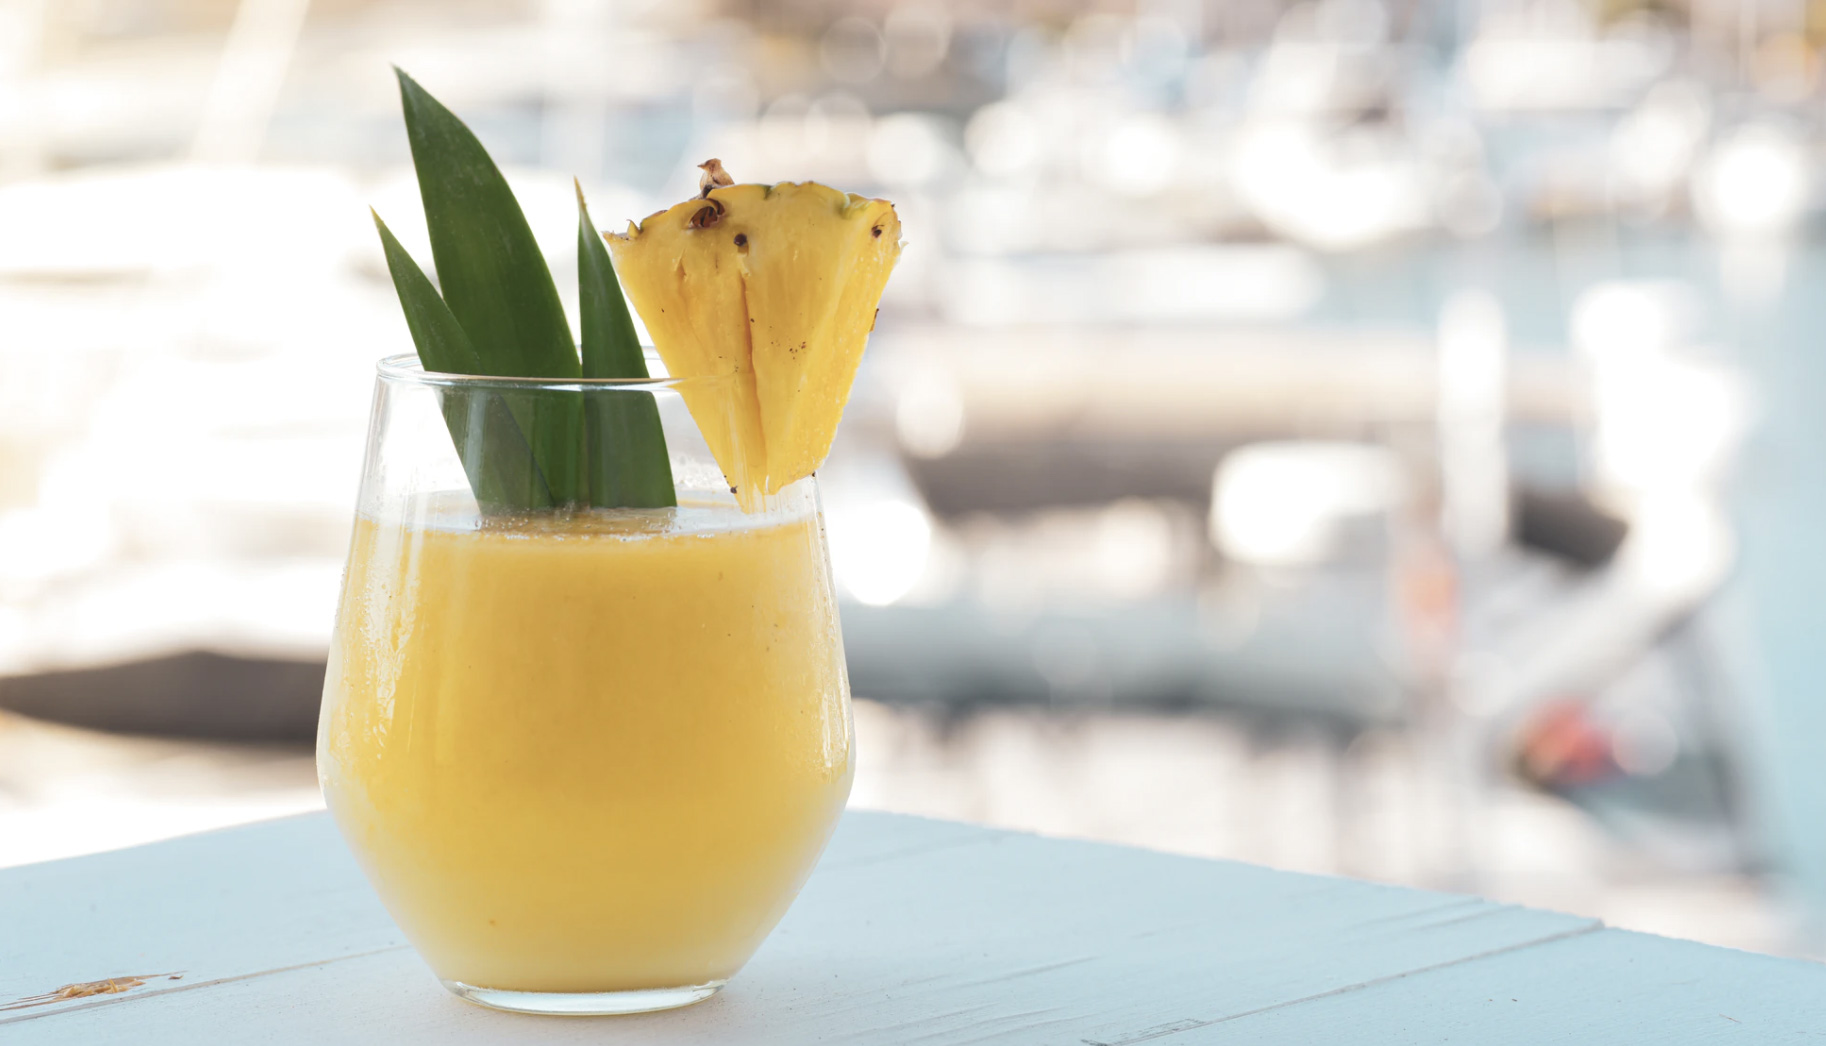 Pina colada near the water. Unsplash - YesMore Content